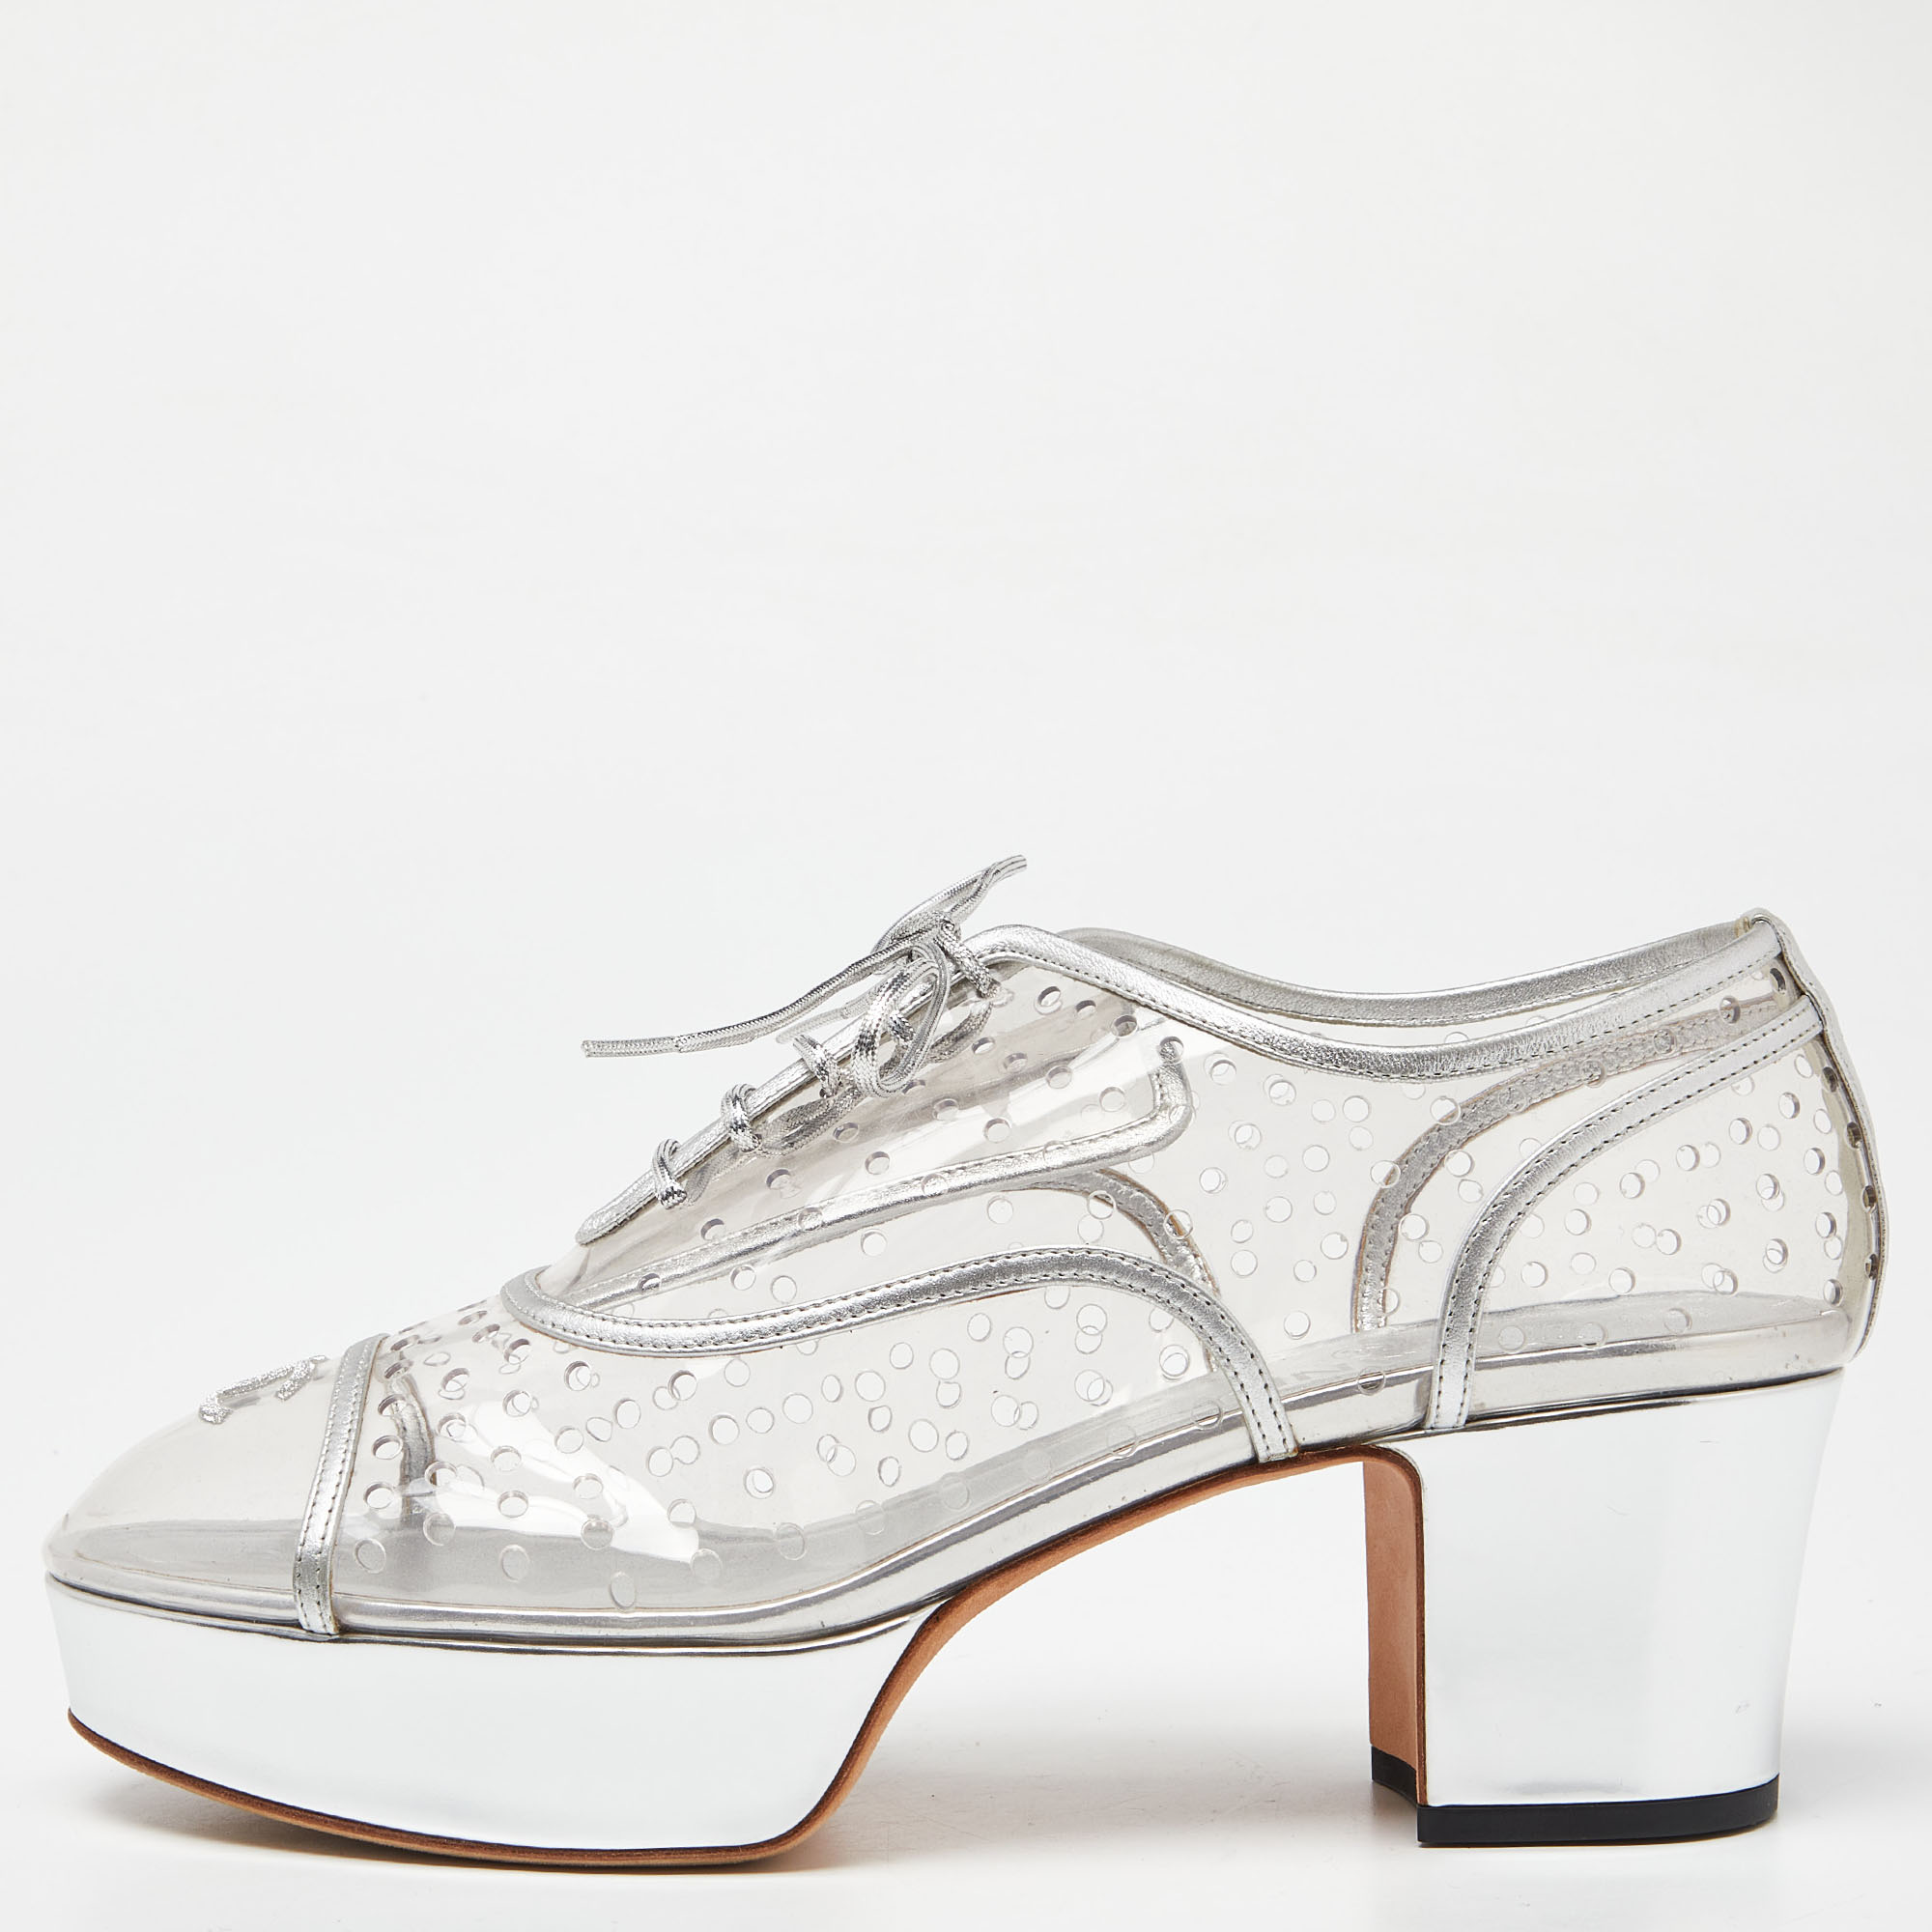 Pre-owned Chanel Transparent/silver Pvc And Leather Cc Block Heel Lace Up Platform Pumps Size 41